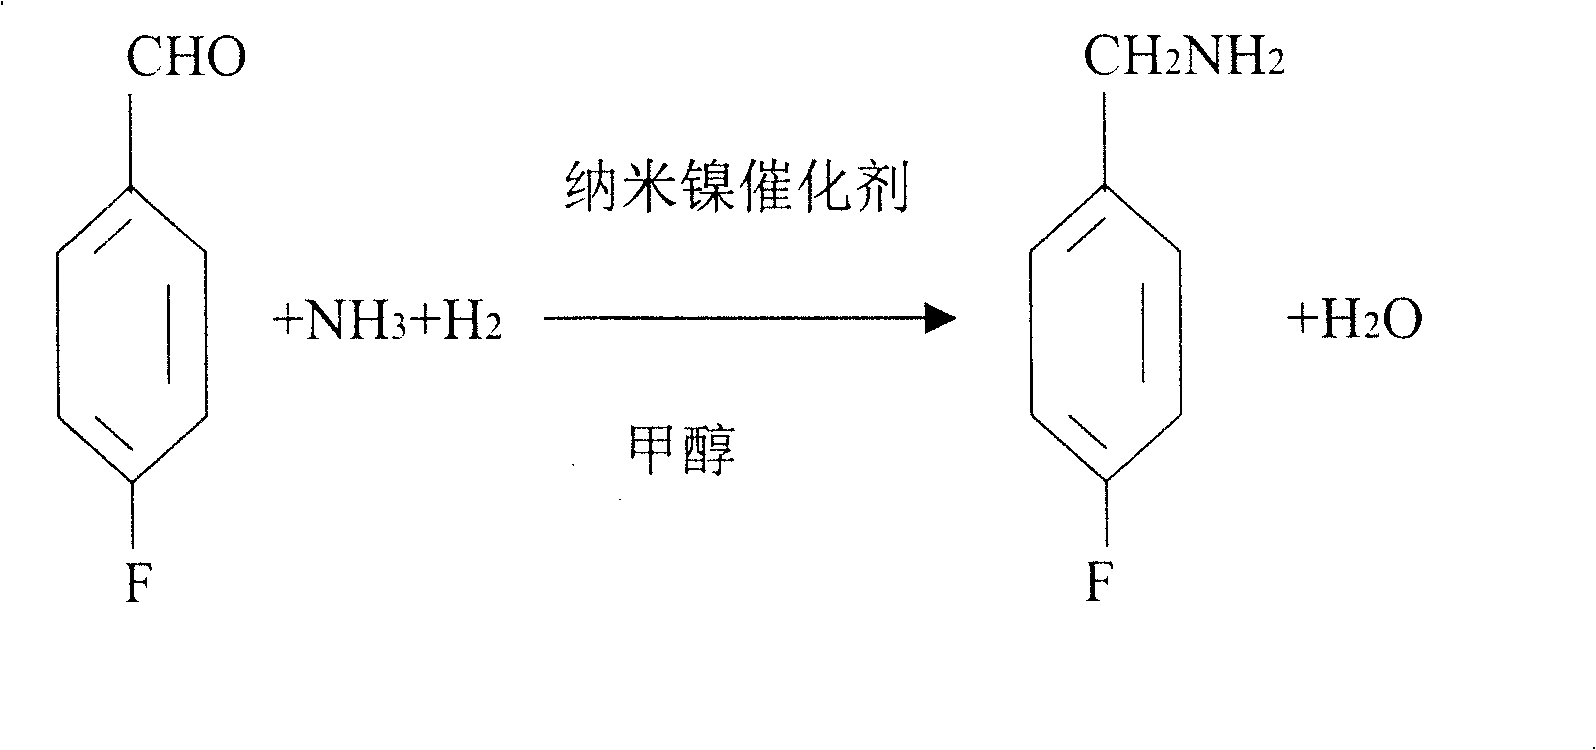 Process for preparing 4-fluorobenzylamine with nano nickel as catalyst